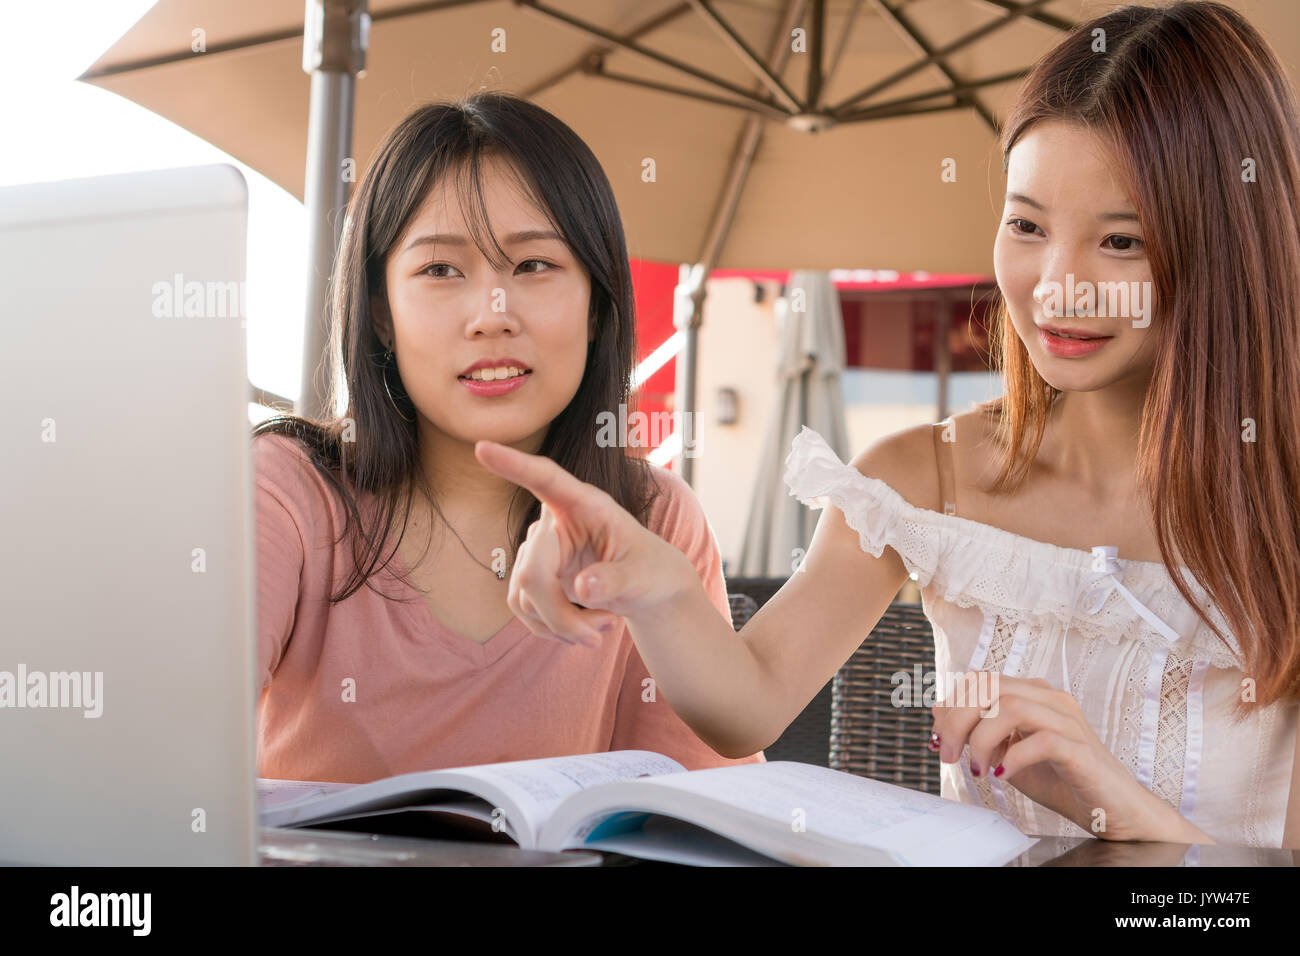 tow asian girl are studying Stock Photo